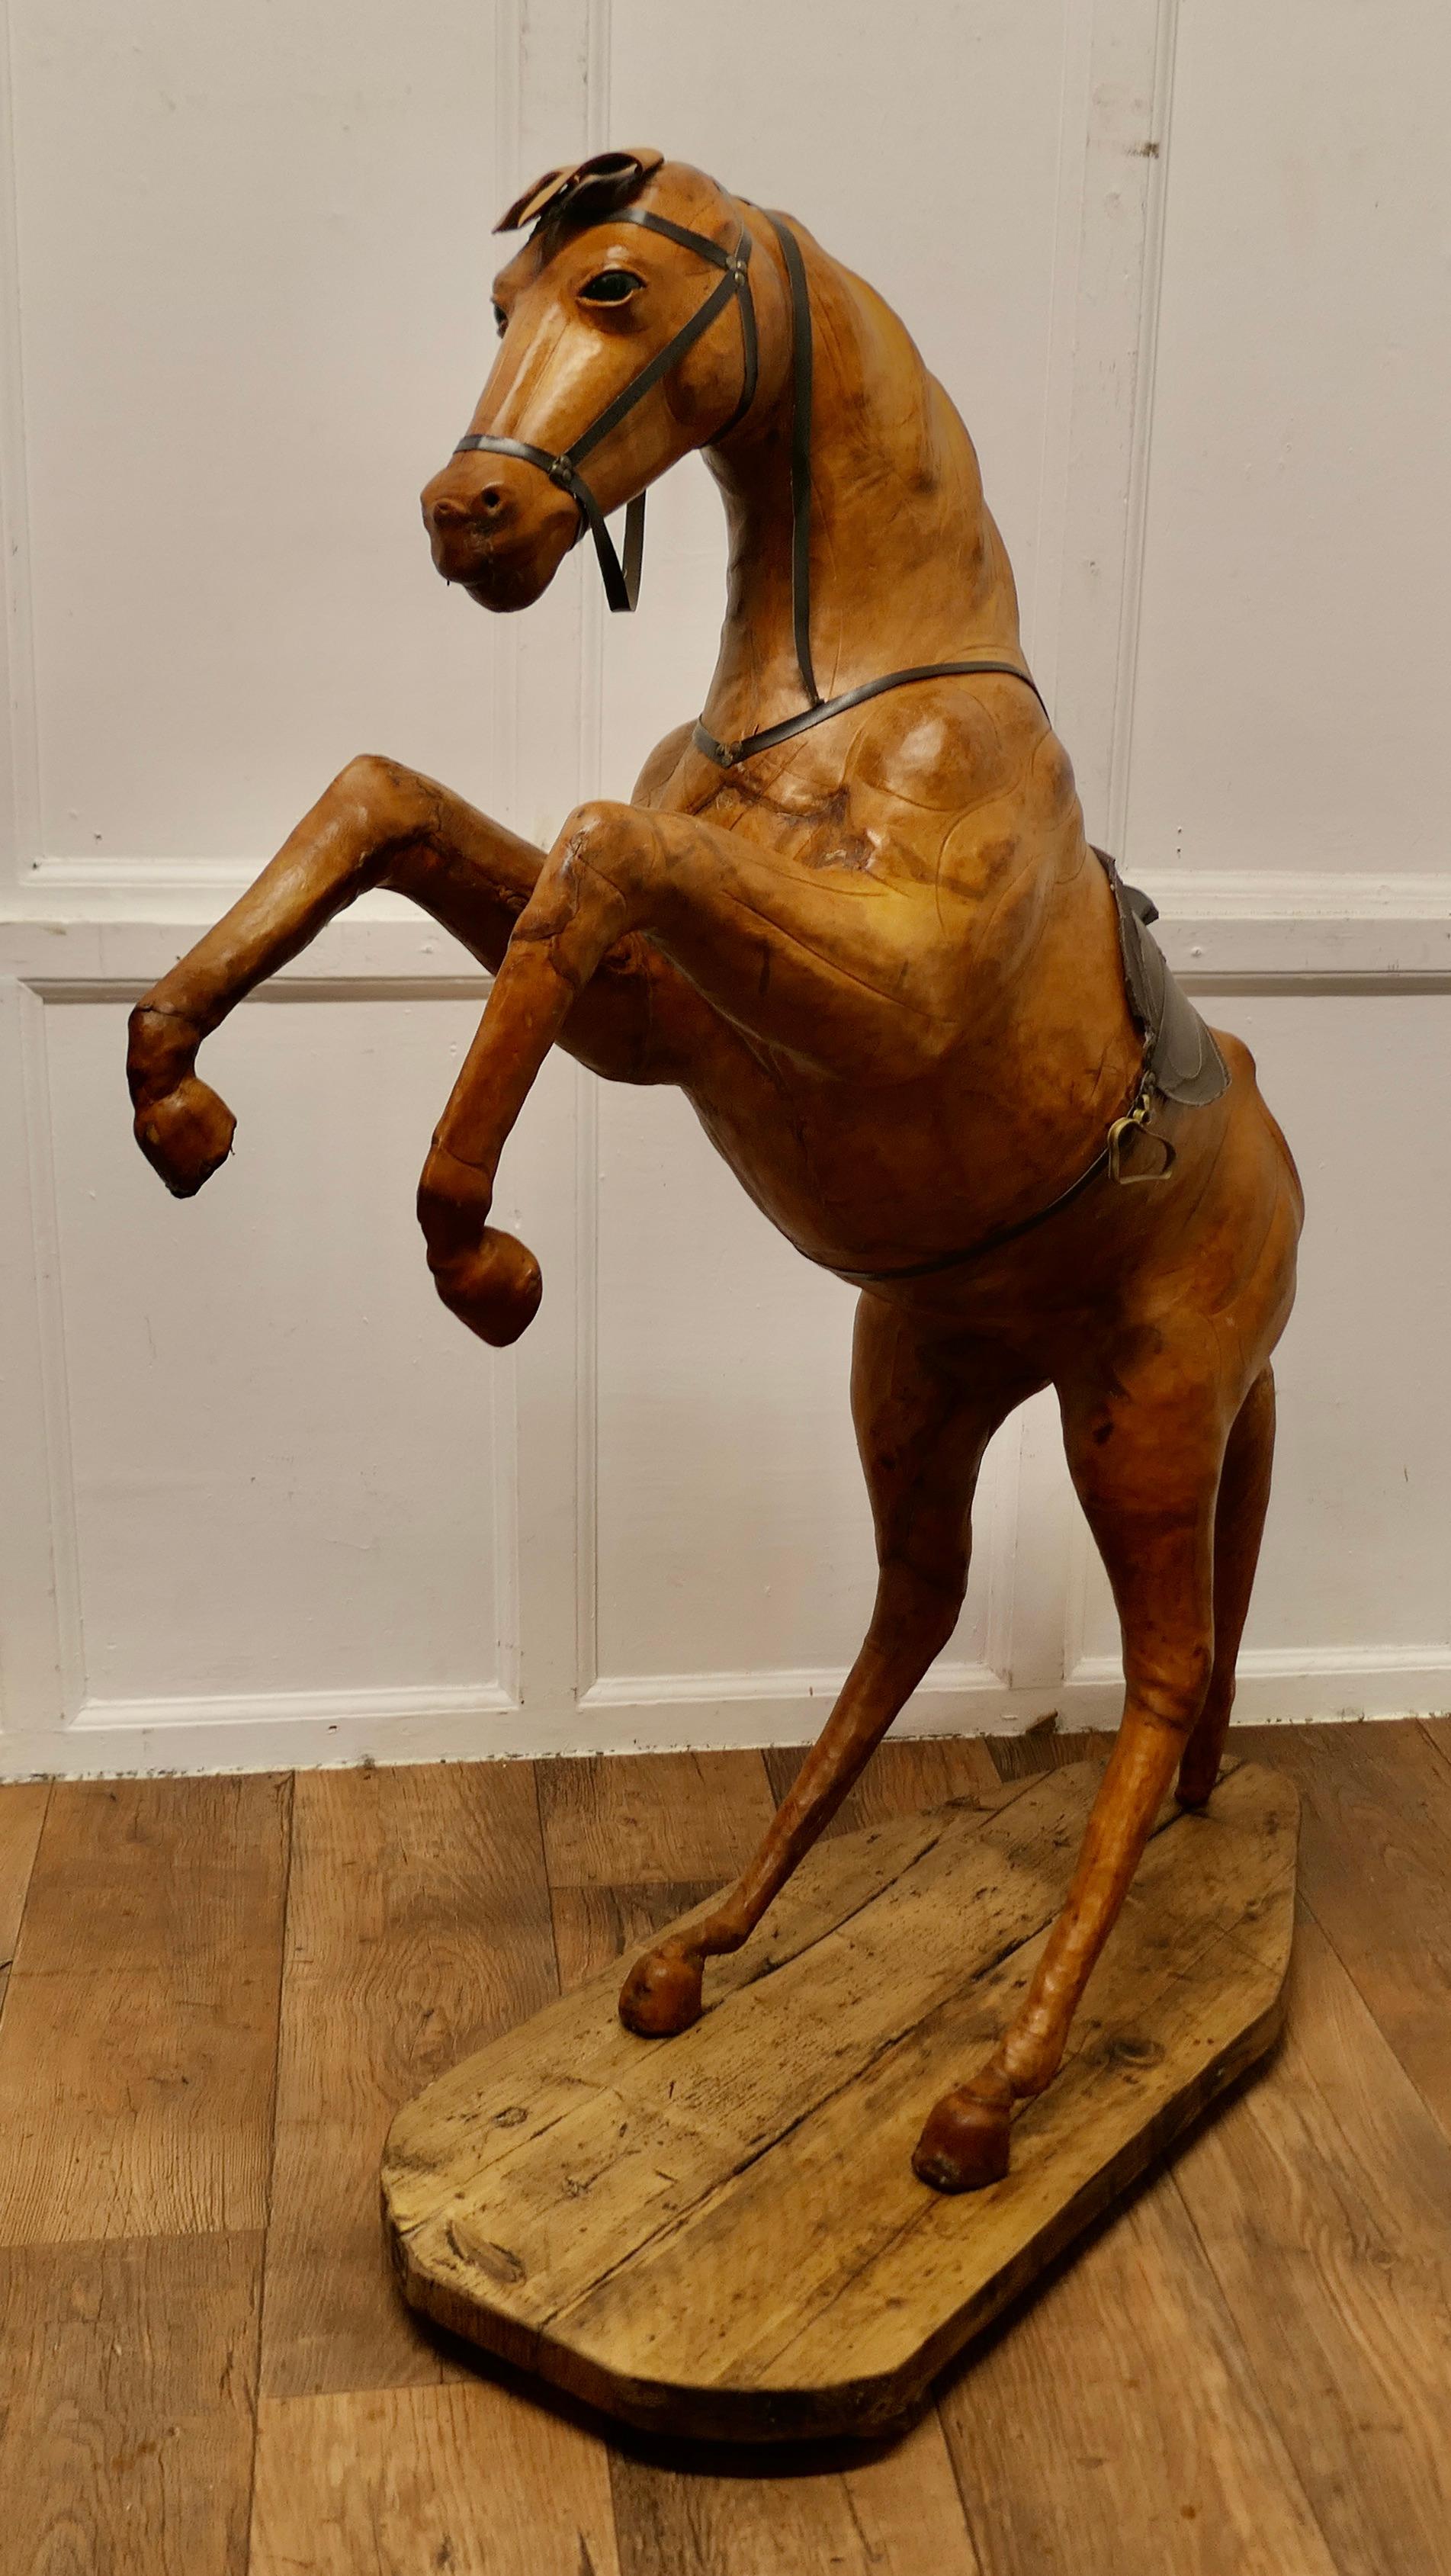 Life Size Arts and Crafts Leather Model of a Horse

Almost Life Size Leather Horse
This is a rare and beautiful find, it was made for Liberty but the label is no longer attached 
This handsome beast is free standing in a rearing position
The